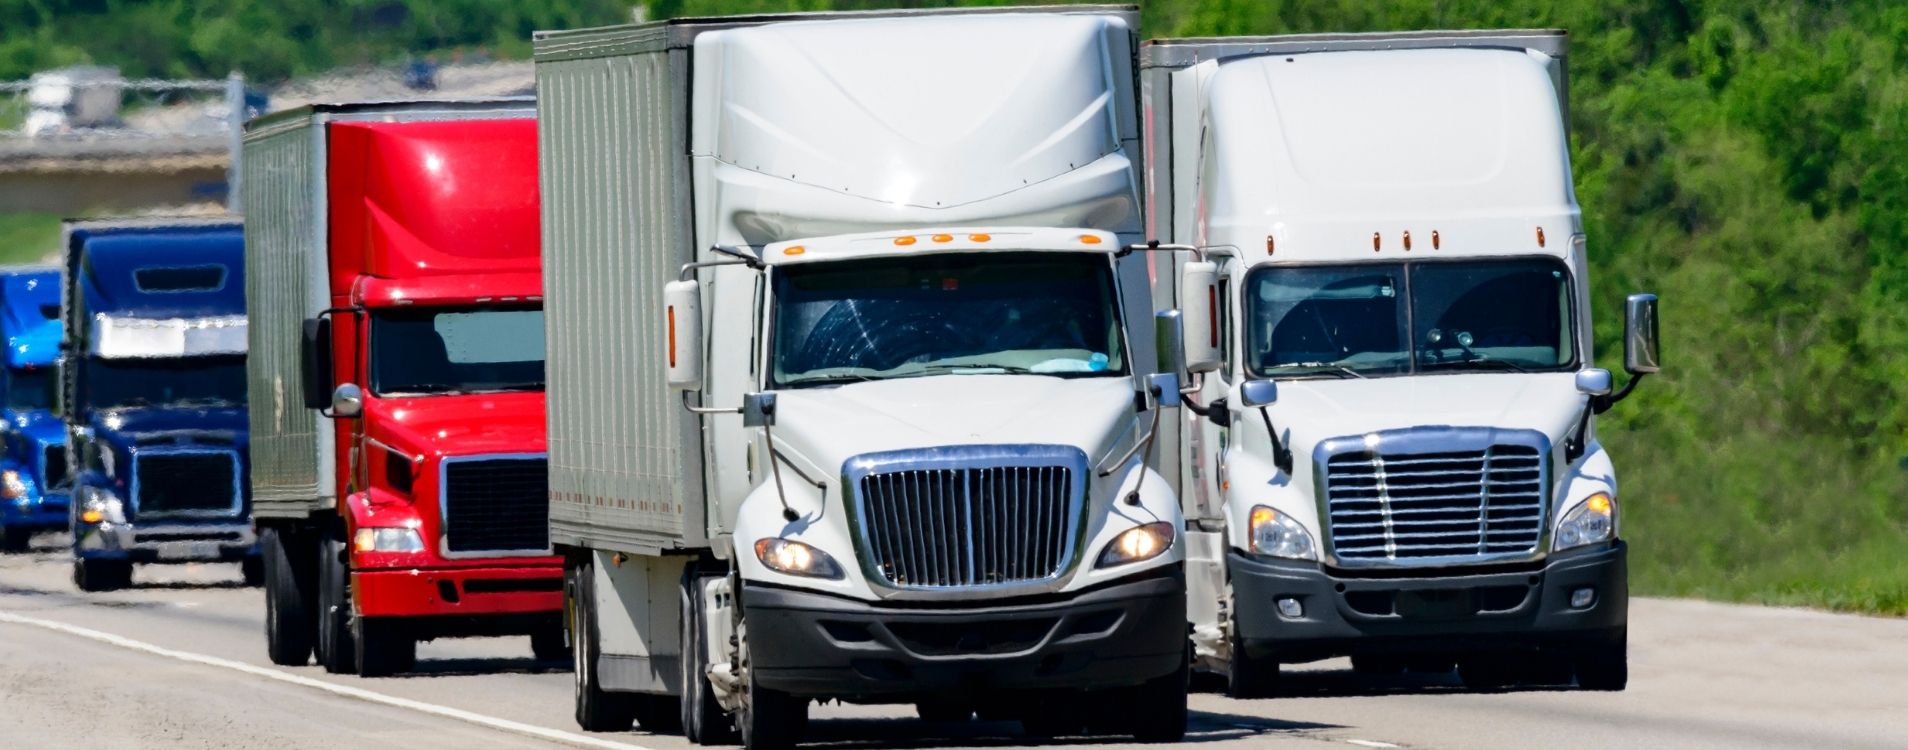 How To Legally Establish A New Trucking Business